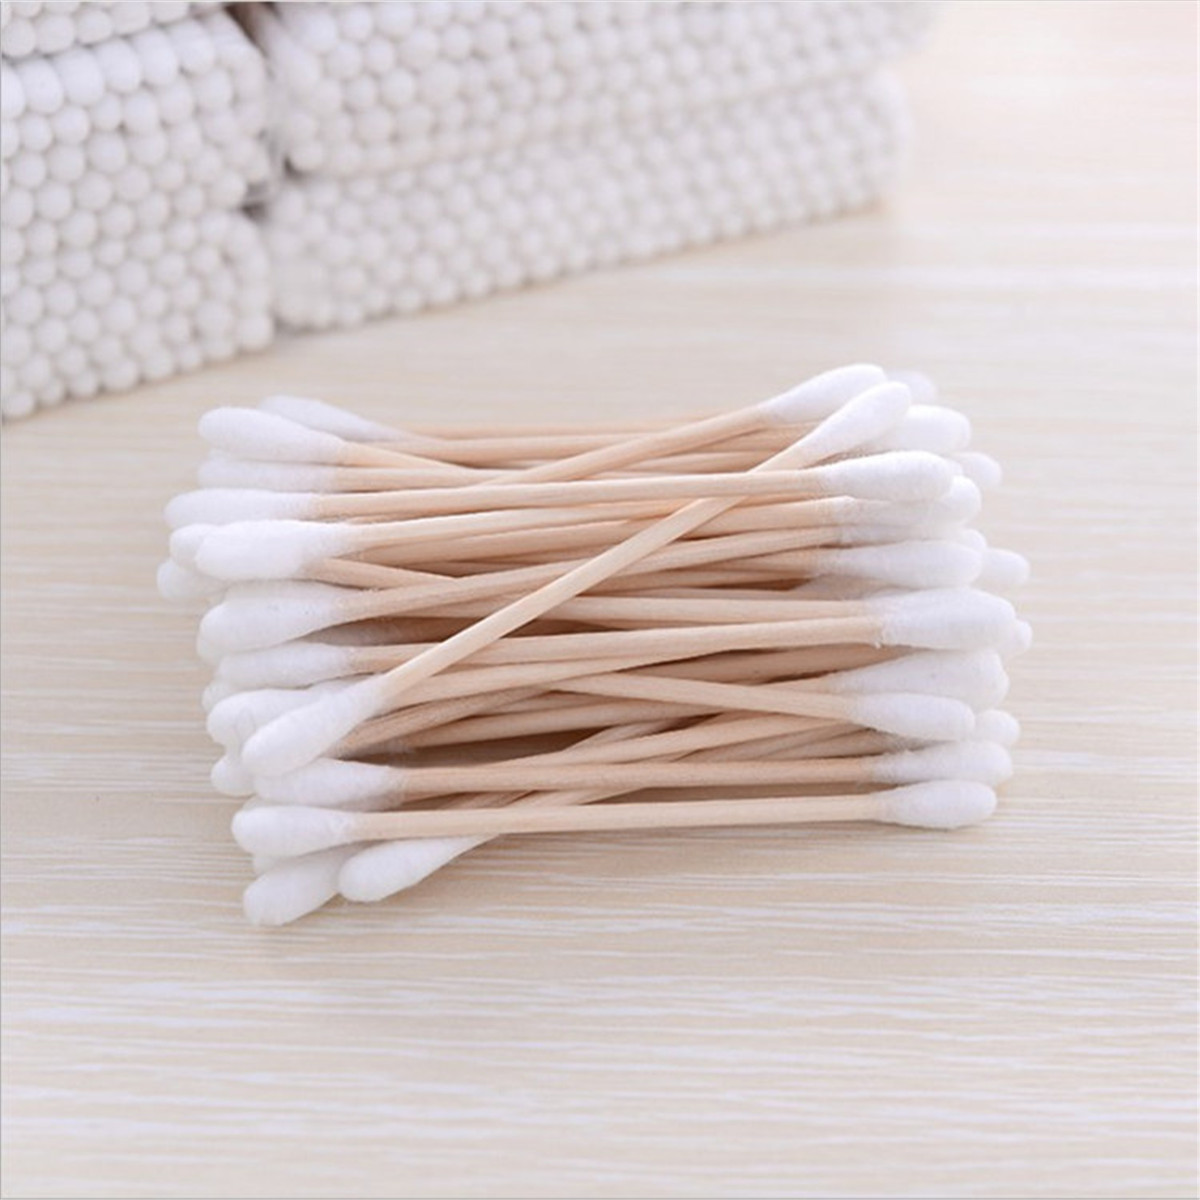 100x-Cotton-Swabs-Swab-Applicator-Q-Tips-Double-Head-Wooden-Stick-Cleaning-Tools-1582736-2